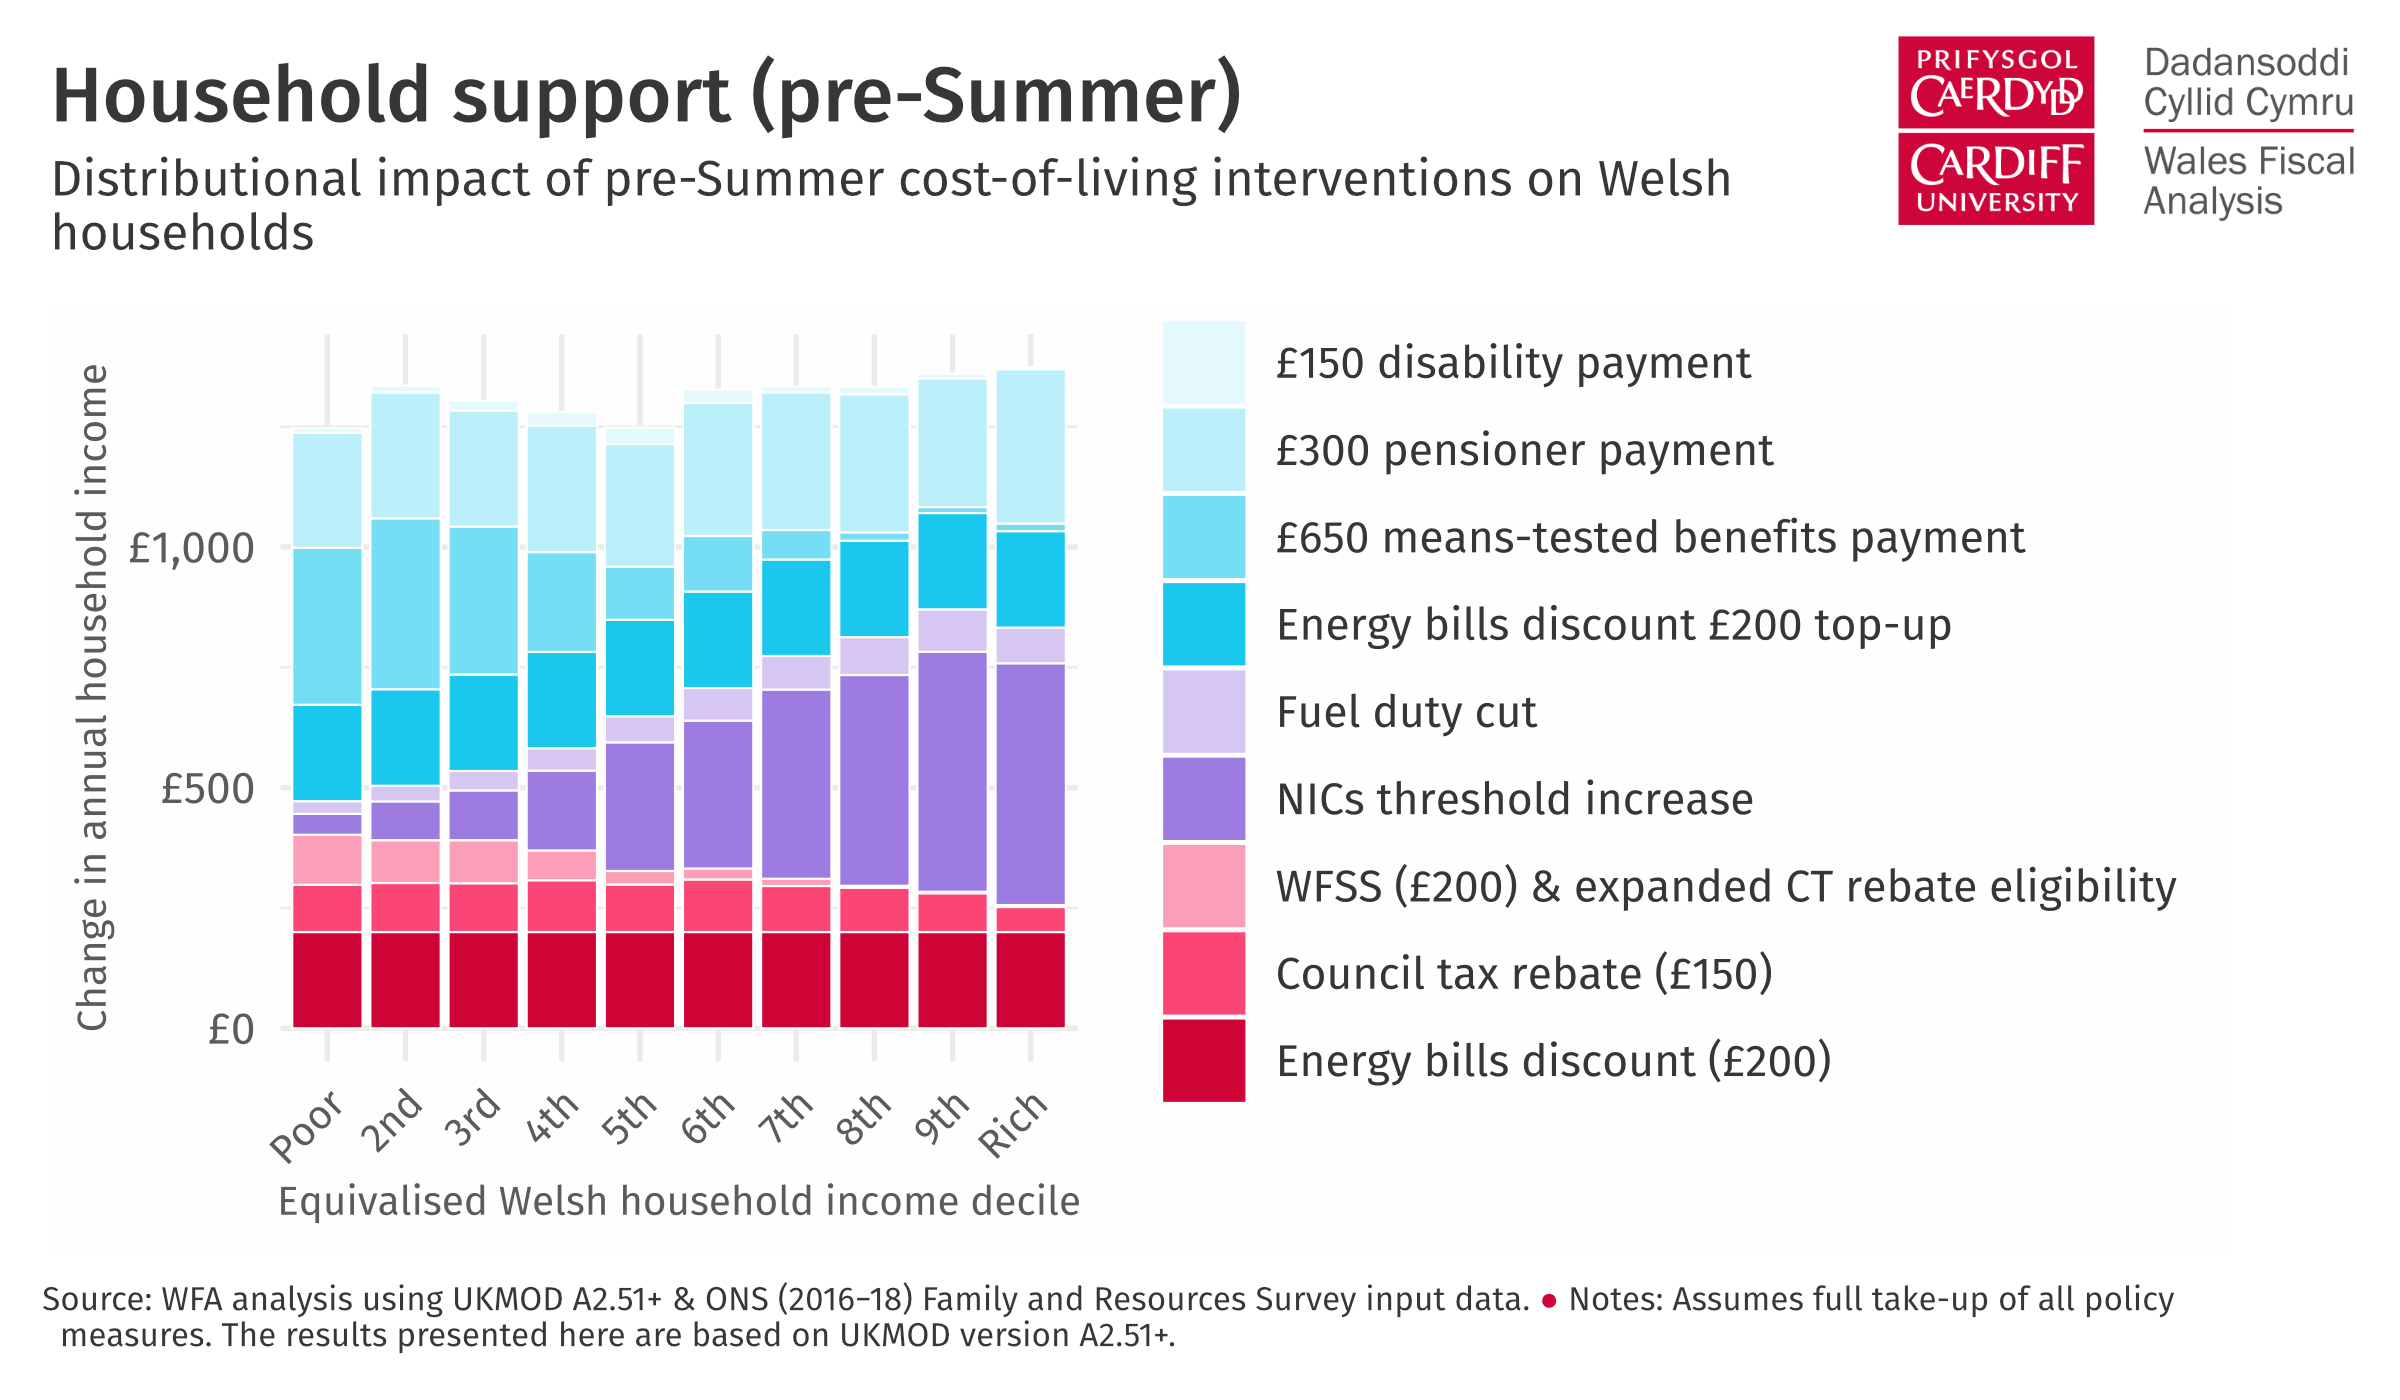 Stacked bar chart showing the distributional impact of pre-Summer cost-of-living interventions on Welsh households.